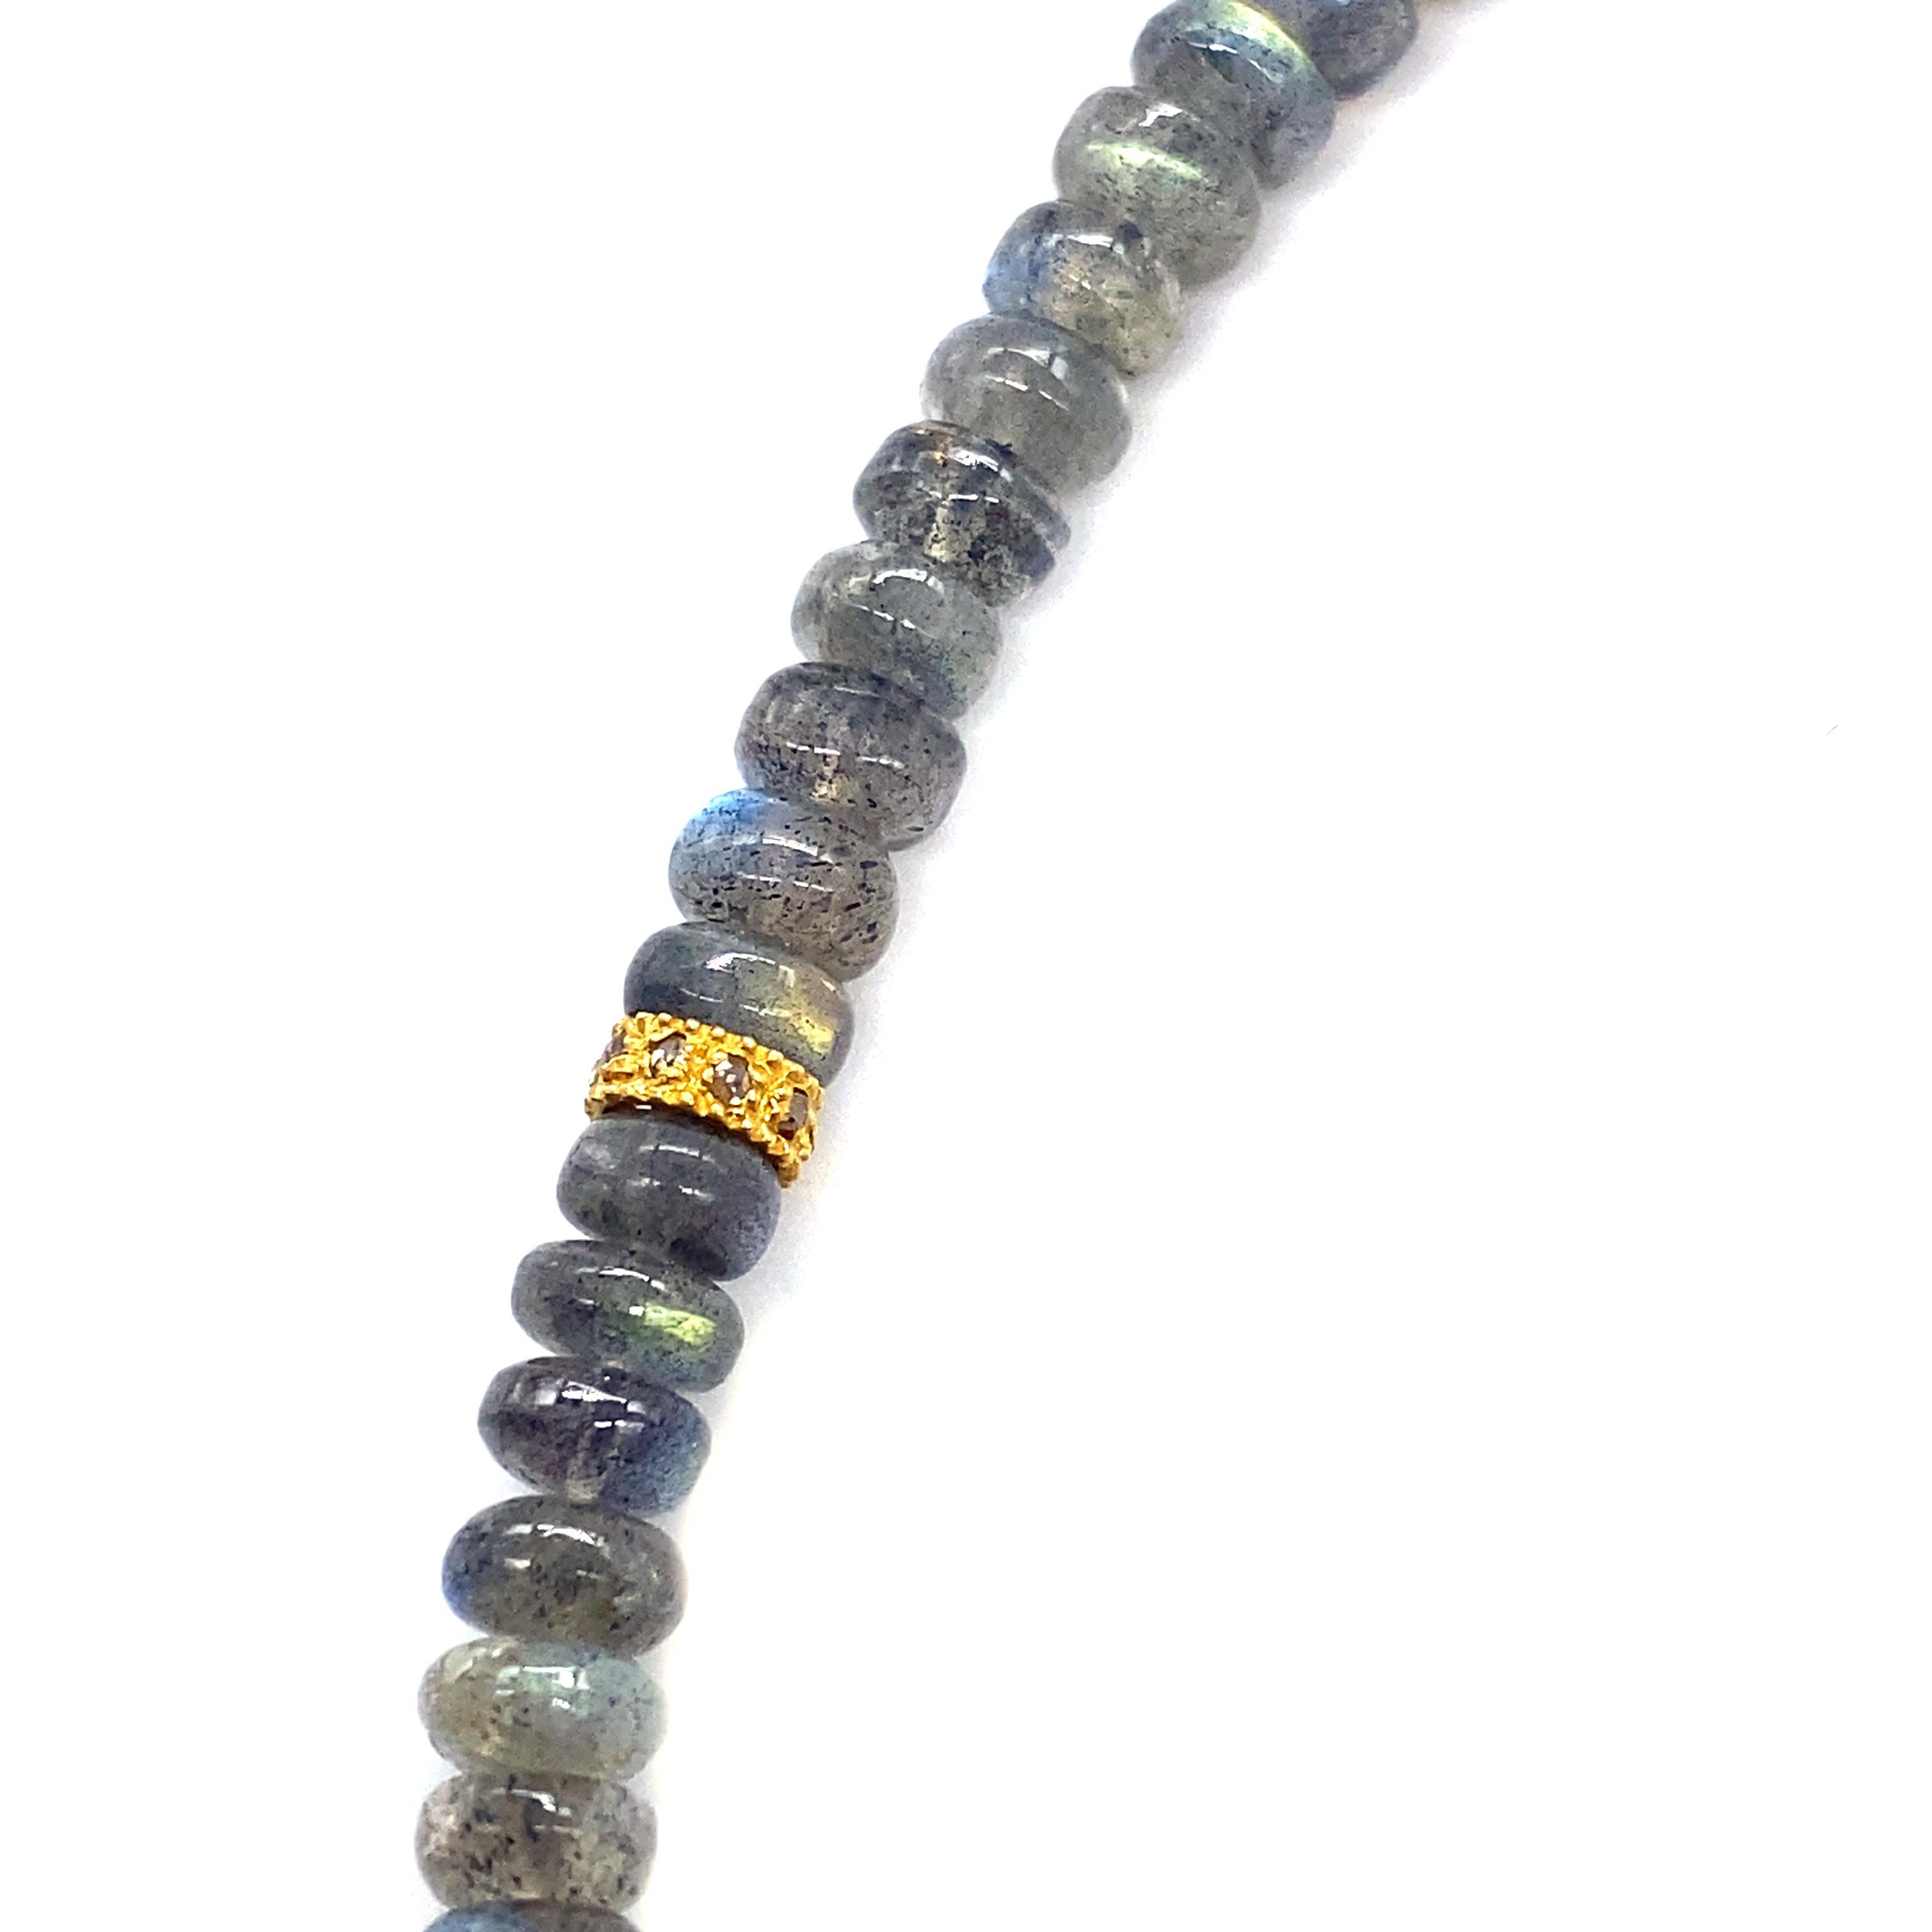 Labradorite Beads and 20 Karat Yellow Gold Rose-Cut Ring Necklace. This Necklace Comes With 94.90 Carat Labradorite Beads and 0.57 Carat Diamonds.